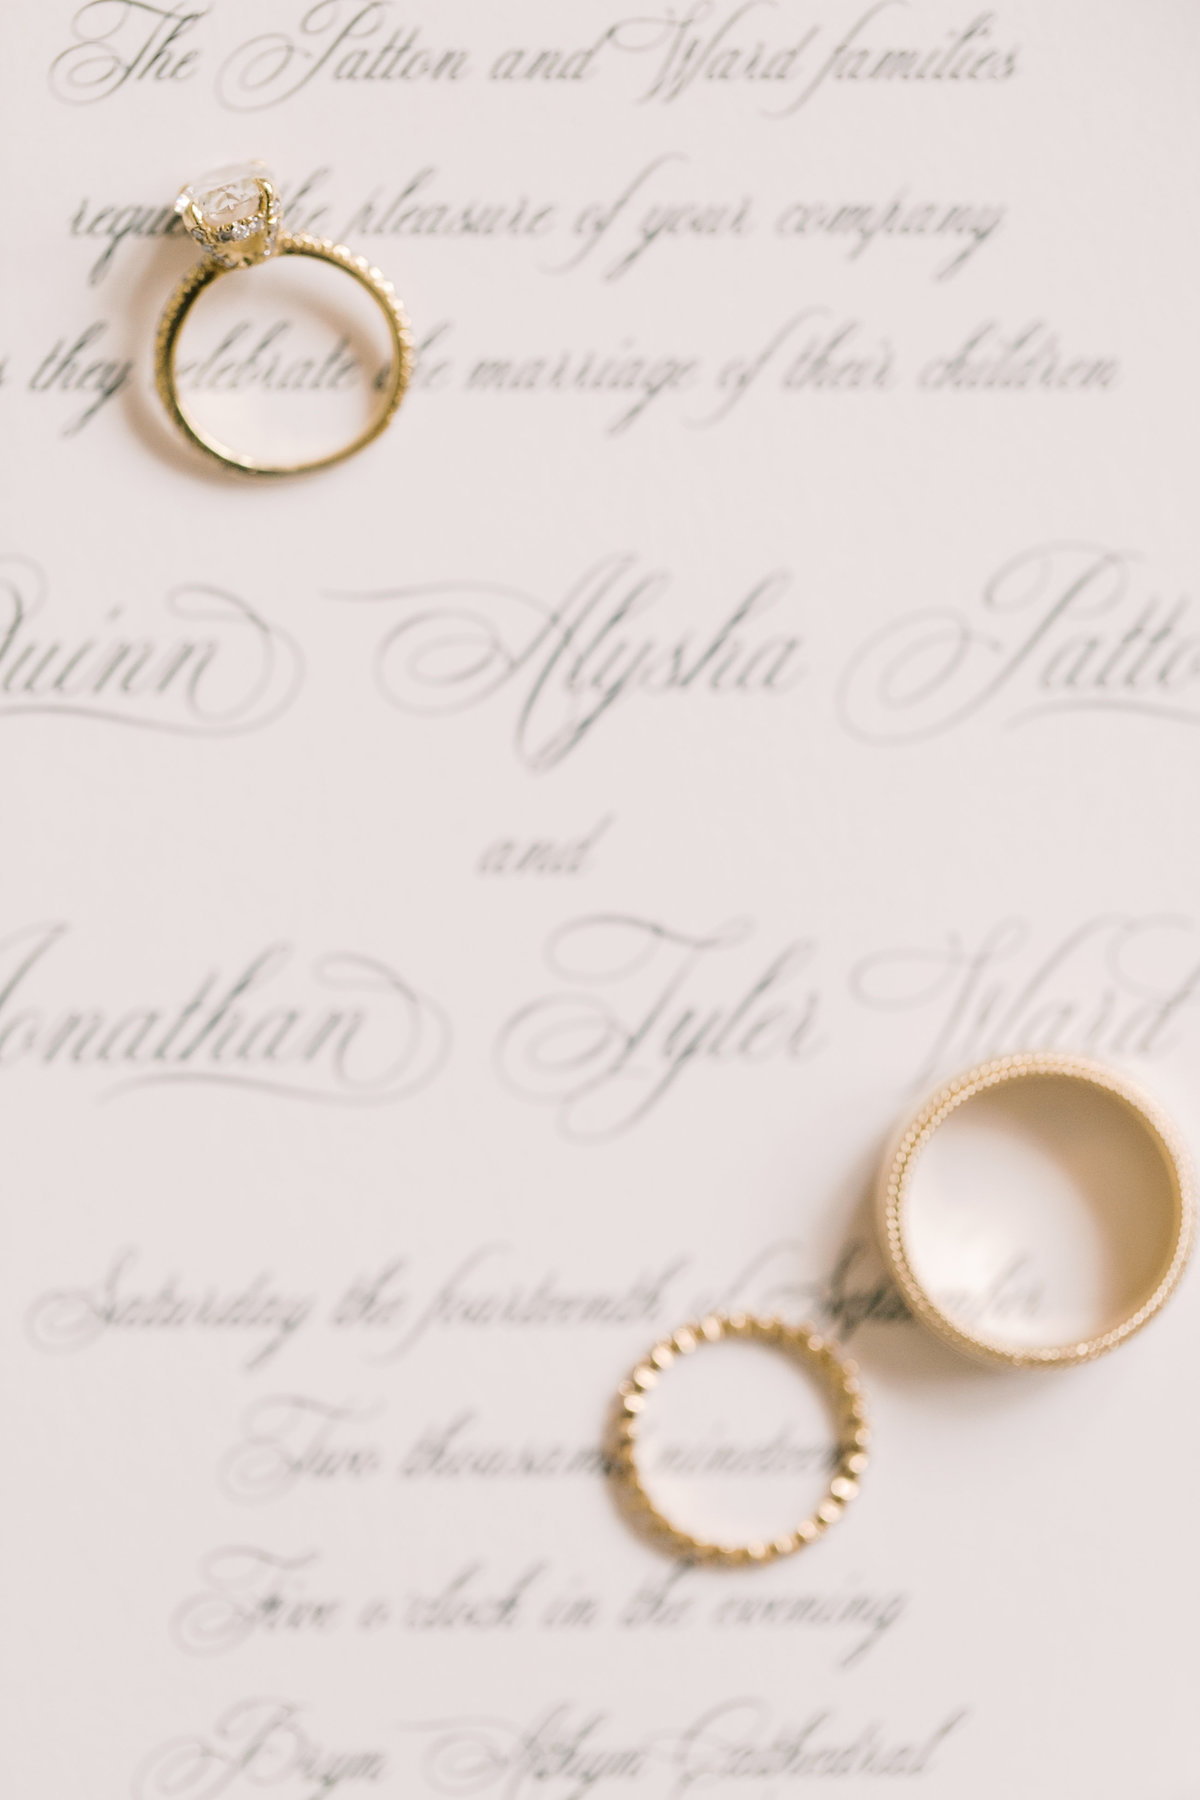 gold wedding bands sitting on wedding invitations during detail shots